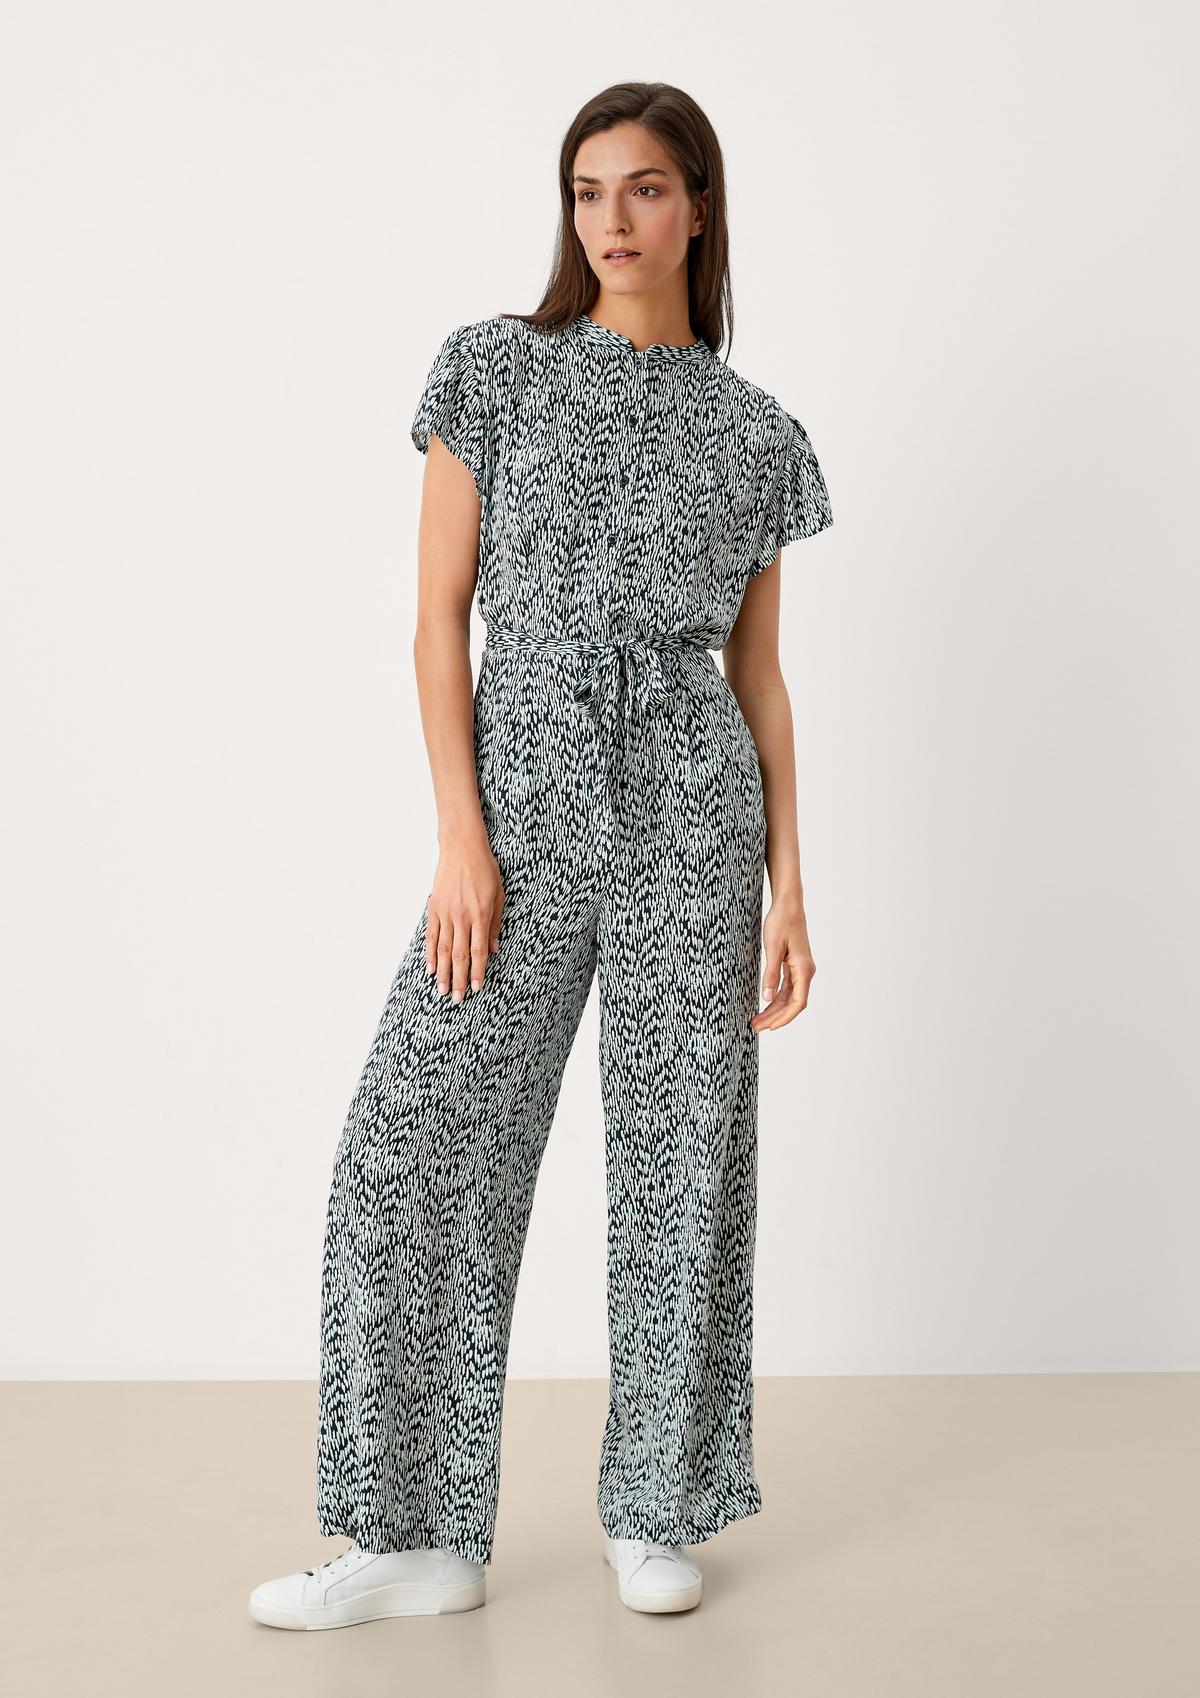 s.Oliver Jumpsuit mit Allover-Muster